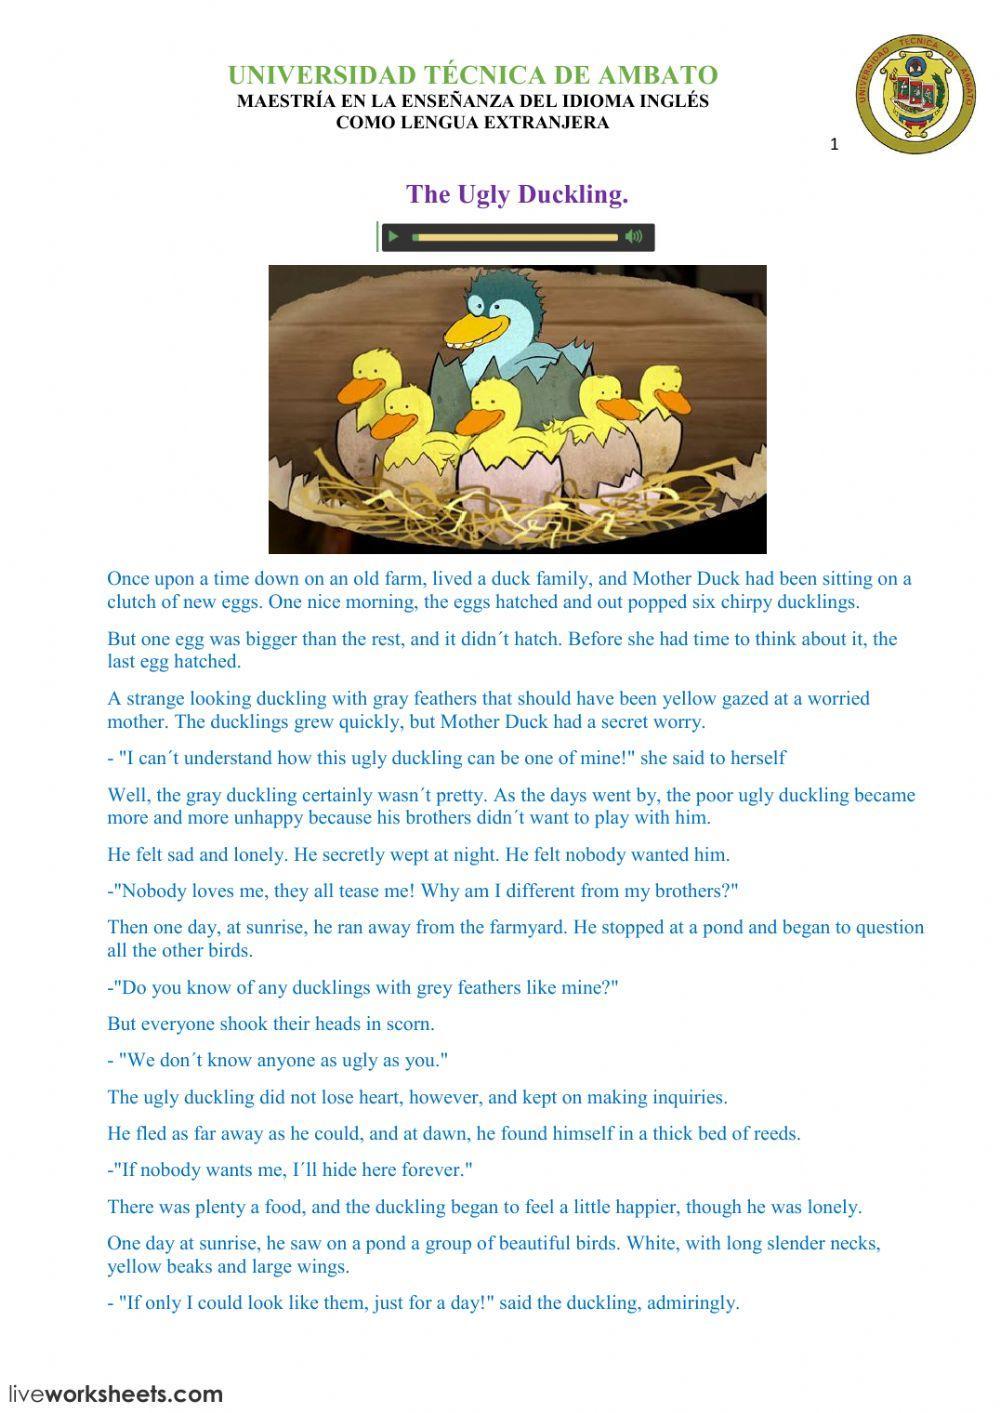 The Ugly Duckling Fairy Tale.